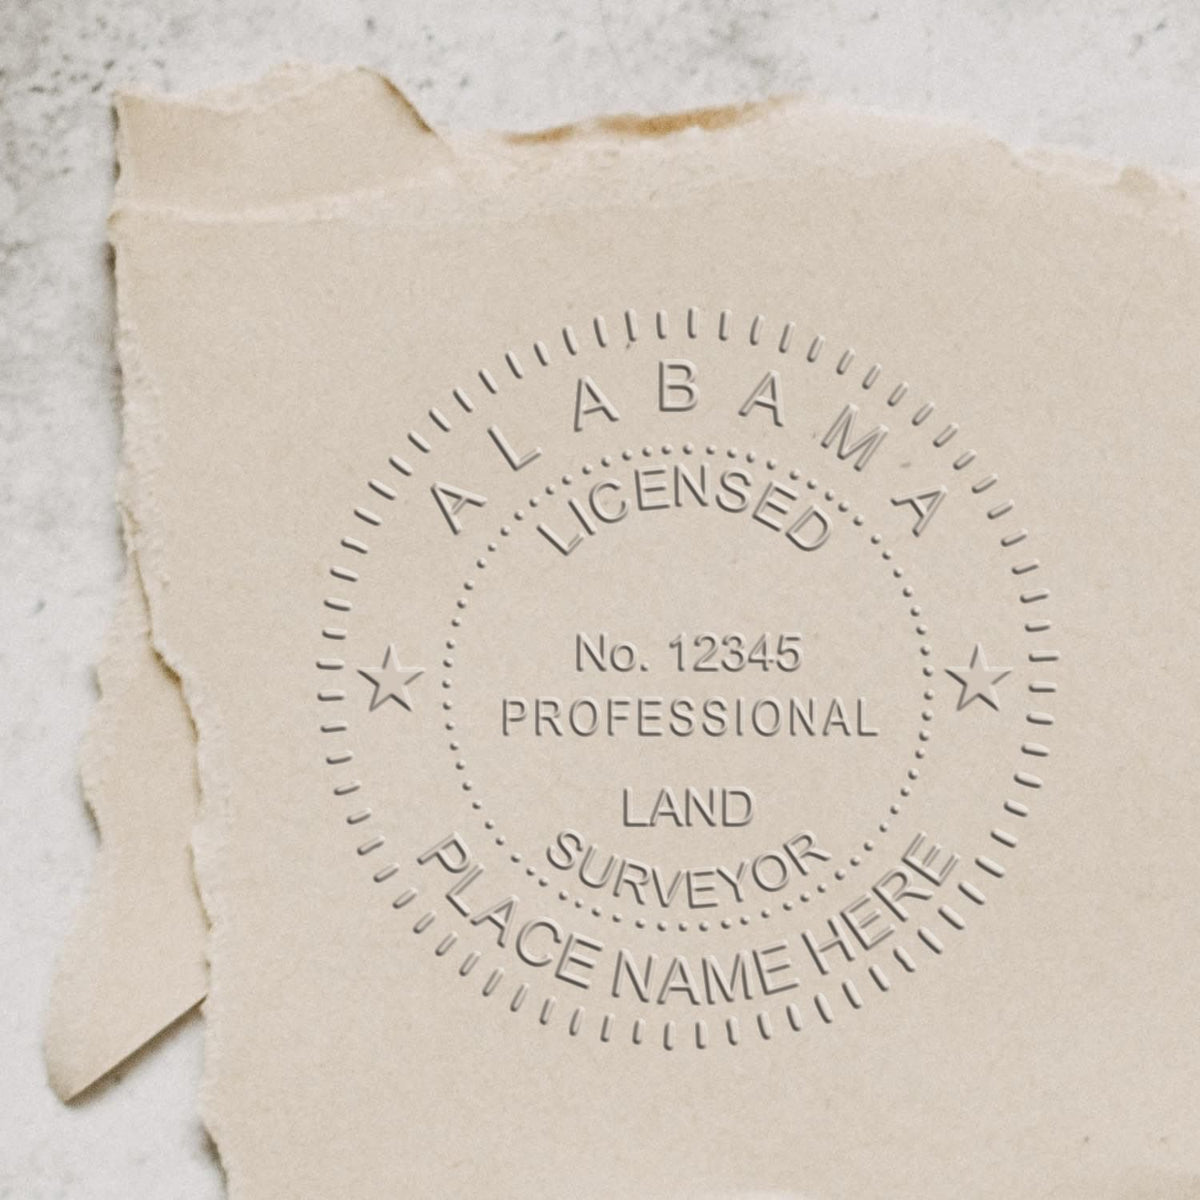 A photograph of the State of Alabama Soft Land Surveyor Embossing Seal stamp impression reveals a vivid, professional image of the on paper.